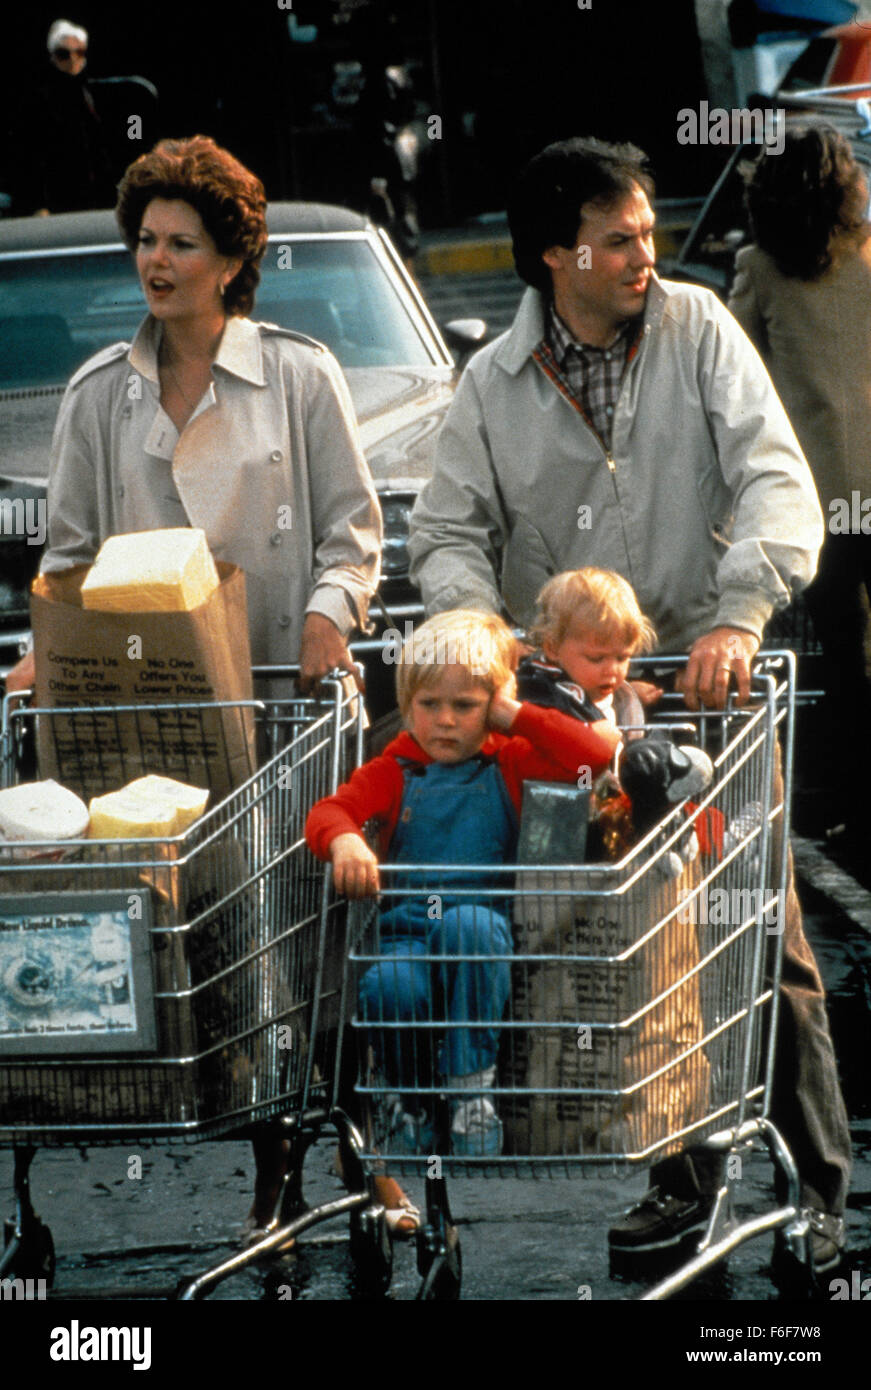 RELEASE DATE: July 22, 1983  MOVIE TITLE: Mr. Mom  DIRECTOR: Stan Dragoti  STUDIO: Sherwood Productions  PLOT: Jack and Caroline are a couple making a decent living when Jack suddenly loses his job. They agree that he should stay at home and look after the house while Caroline works. It's just that he's never done it before, and really doesn't have a clue  PICTURED: ANN JILLIAN as Joan and MICHAEL KEATON as Jack Butler   (Credit Image: c Sherwood ProductionsEntertainment Pictures) Stock Photo